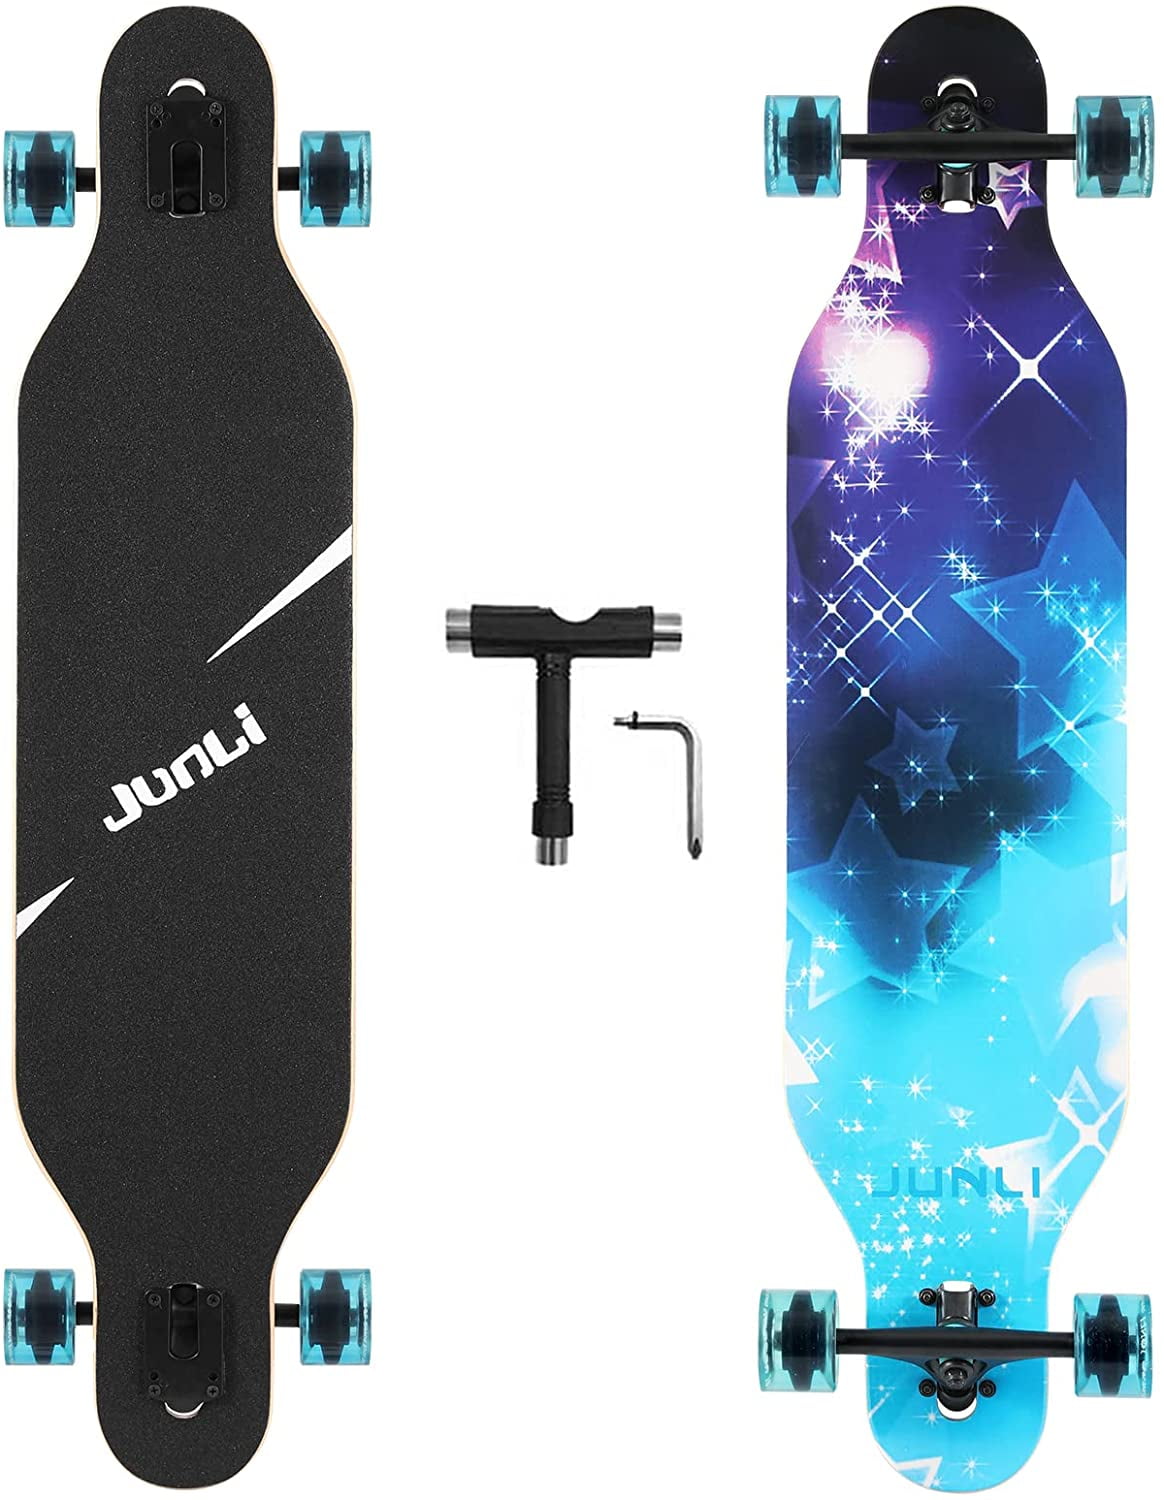 Carving Free-Style and Downhill Complete Skateboard Cruiser for Cruising Junli 41 Inch Freeride Skateboard Longboard